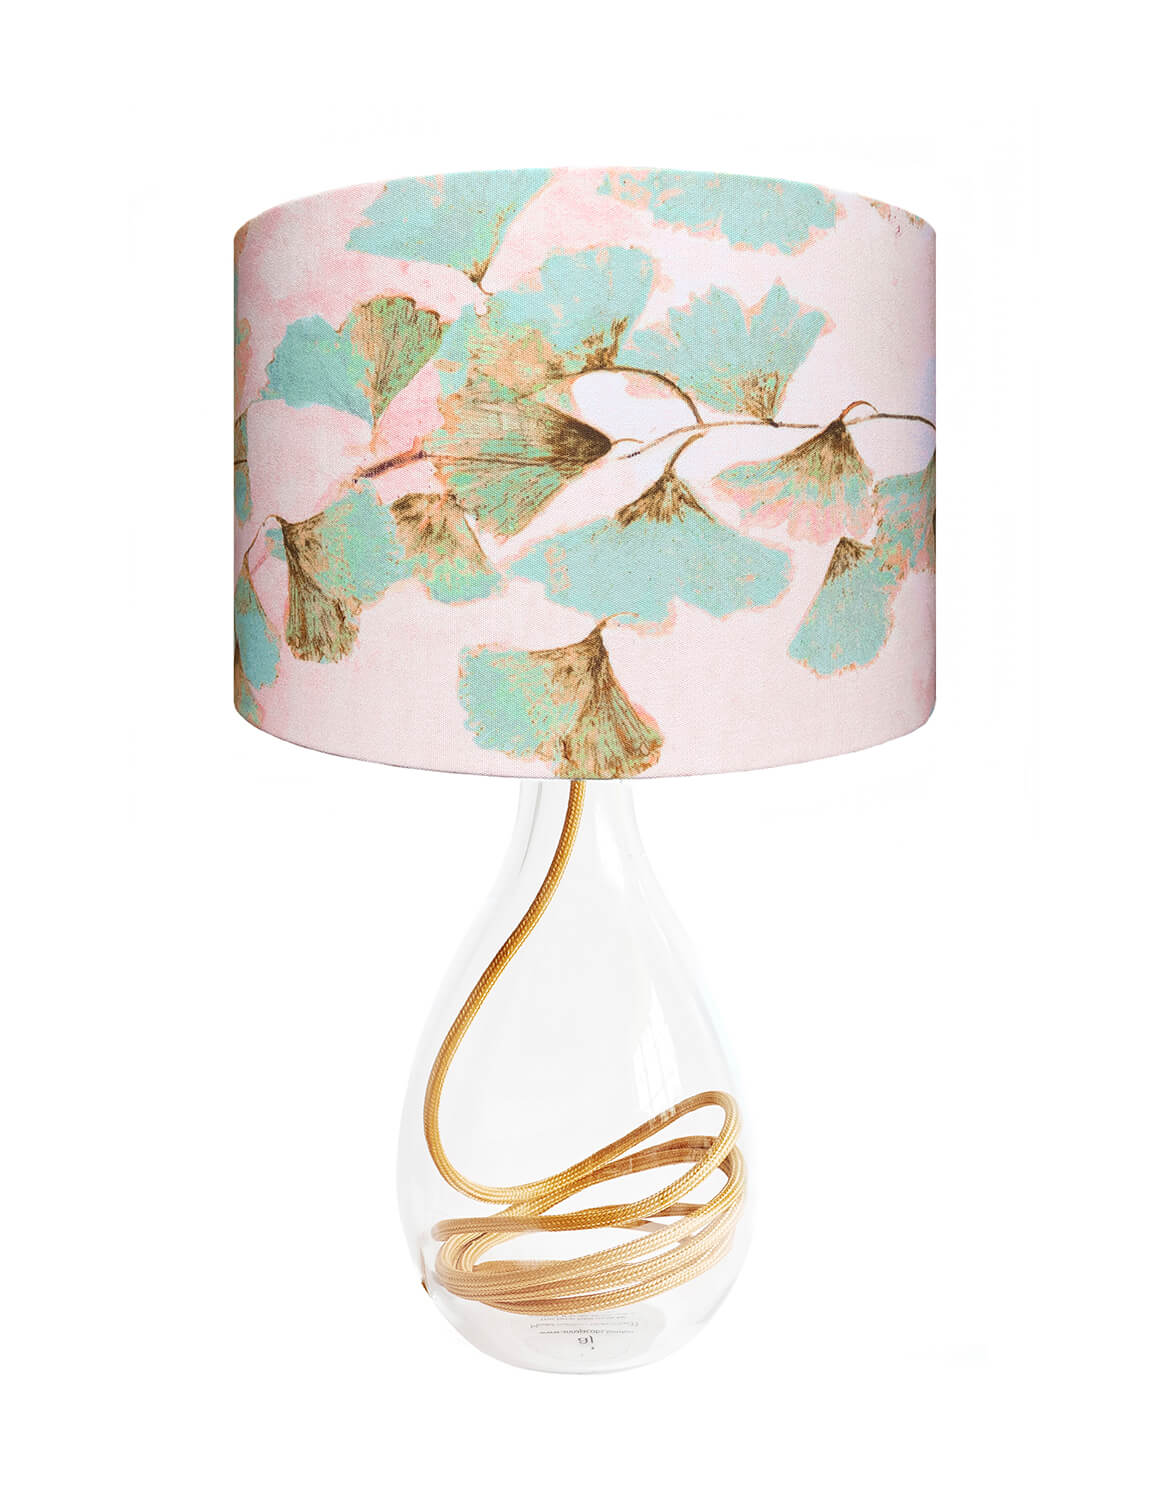 Ginkgo in Jade glass lamp on gold flex, designed by Anna Jacobs